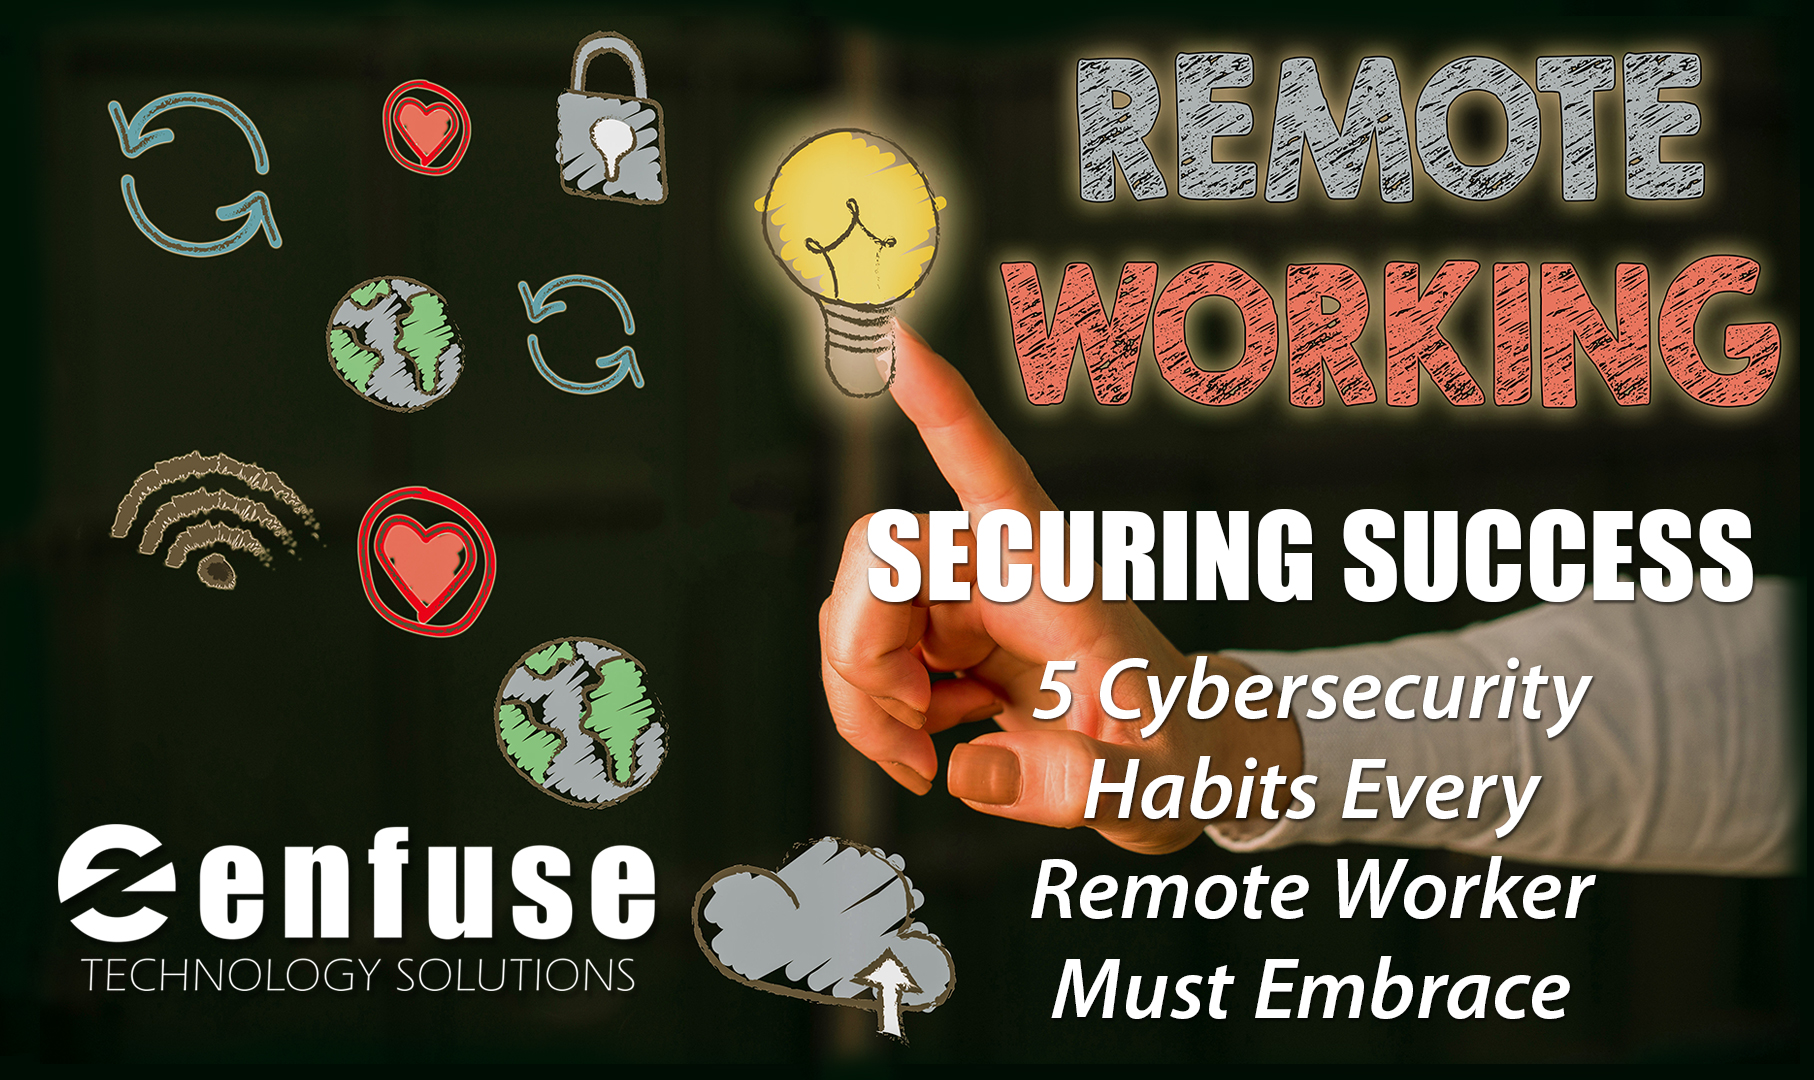 Securing Success: 5 Cybersecurity Habits Every Remote Worker Must Embrace